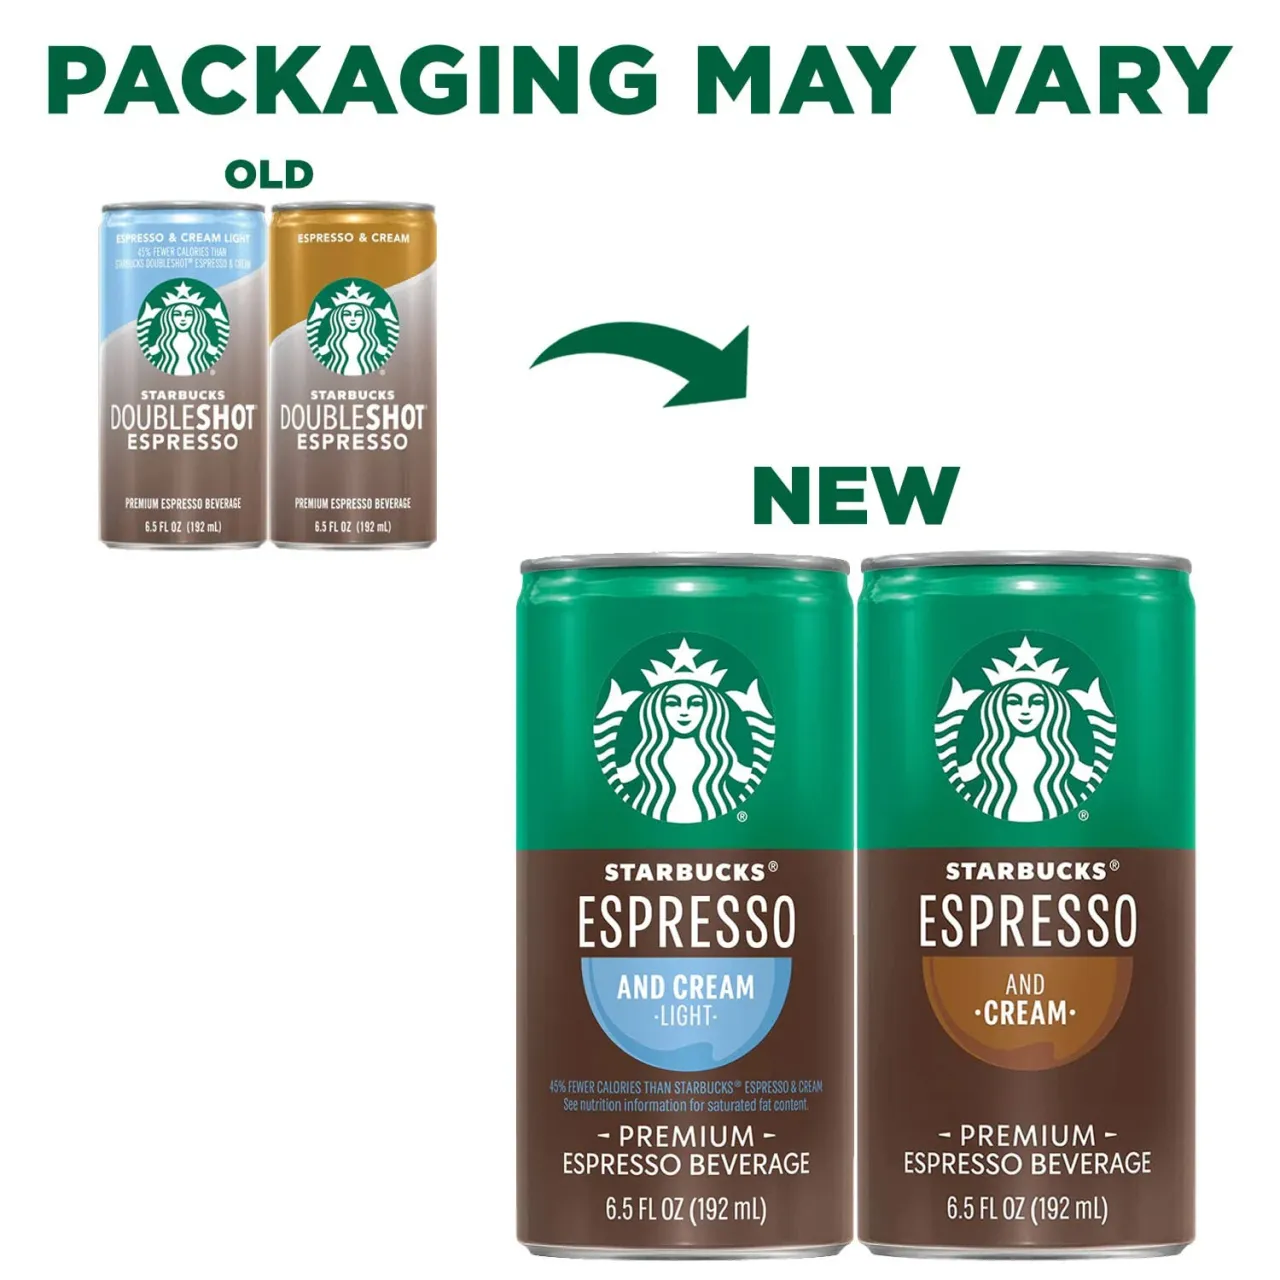 6 Starbucks Ready to Drink Coffee, Espresso & Cream Light , 6.5oz Cans (12 Pack) (Packaging May Vary)